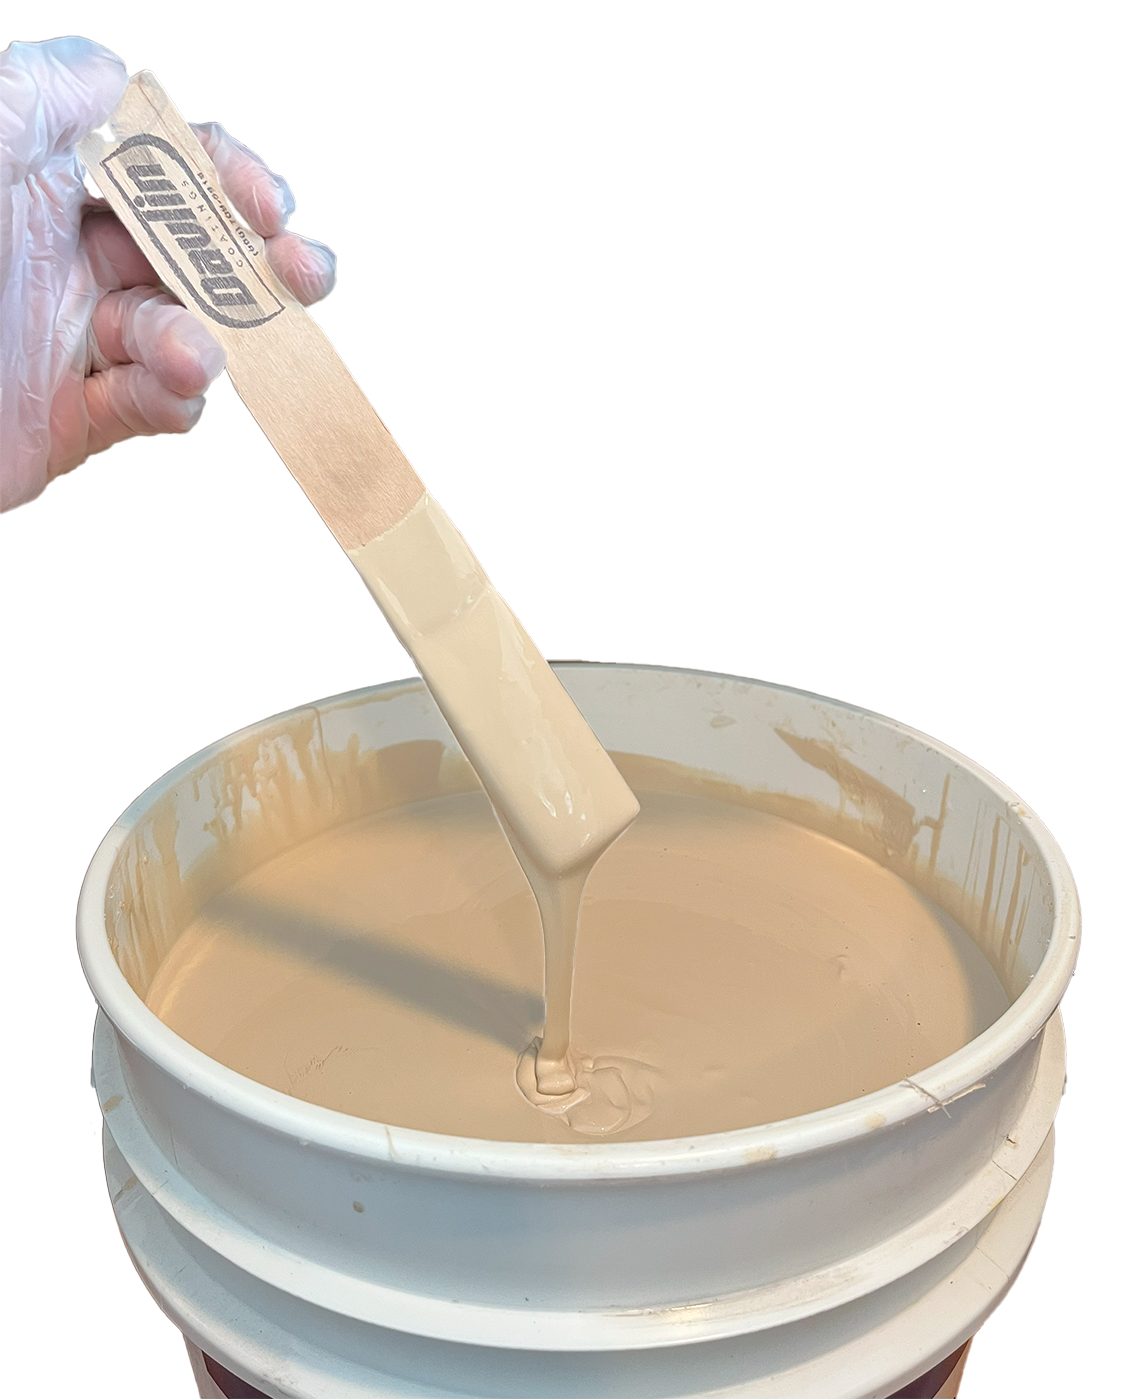 Silicone Roof Coating 1 Gal - Silicone Roof Sealant - Free Shipping - Free Sample